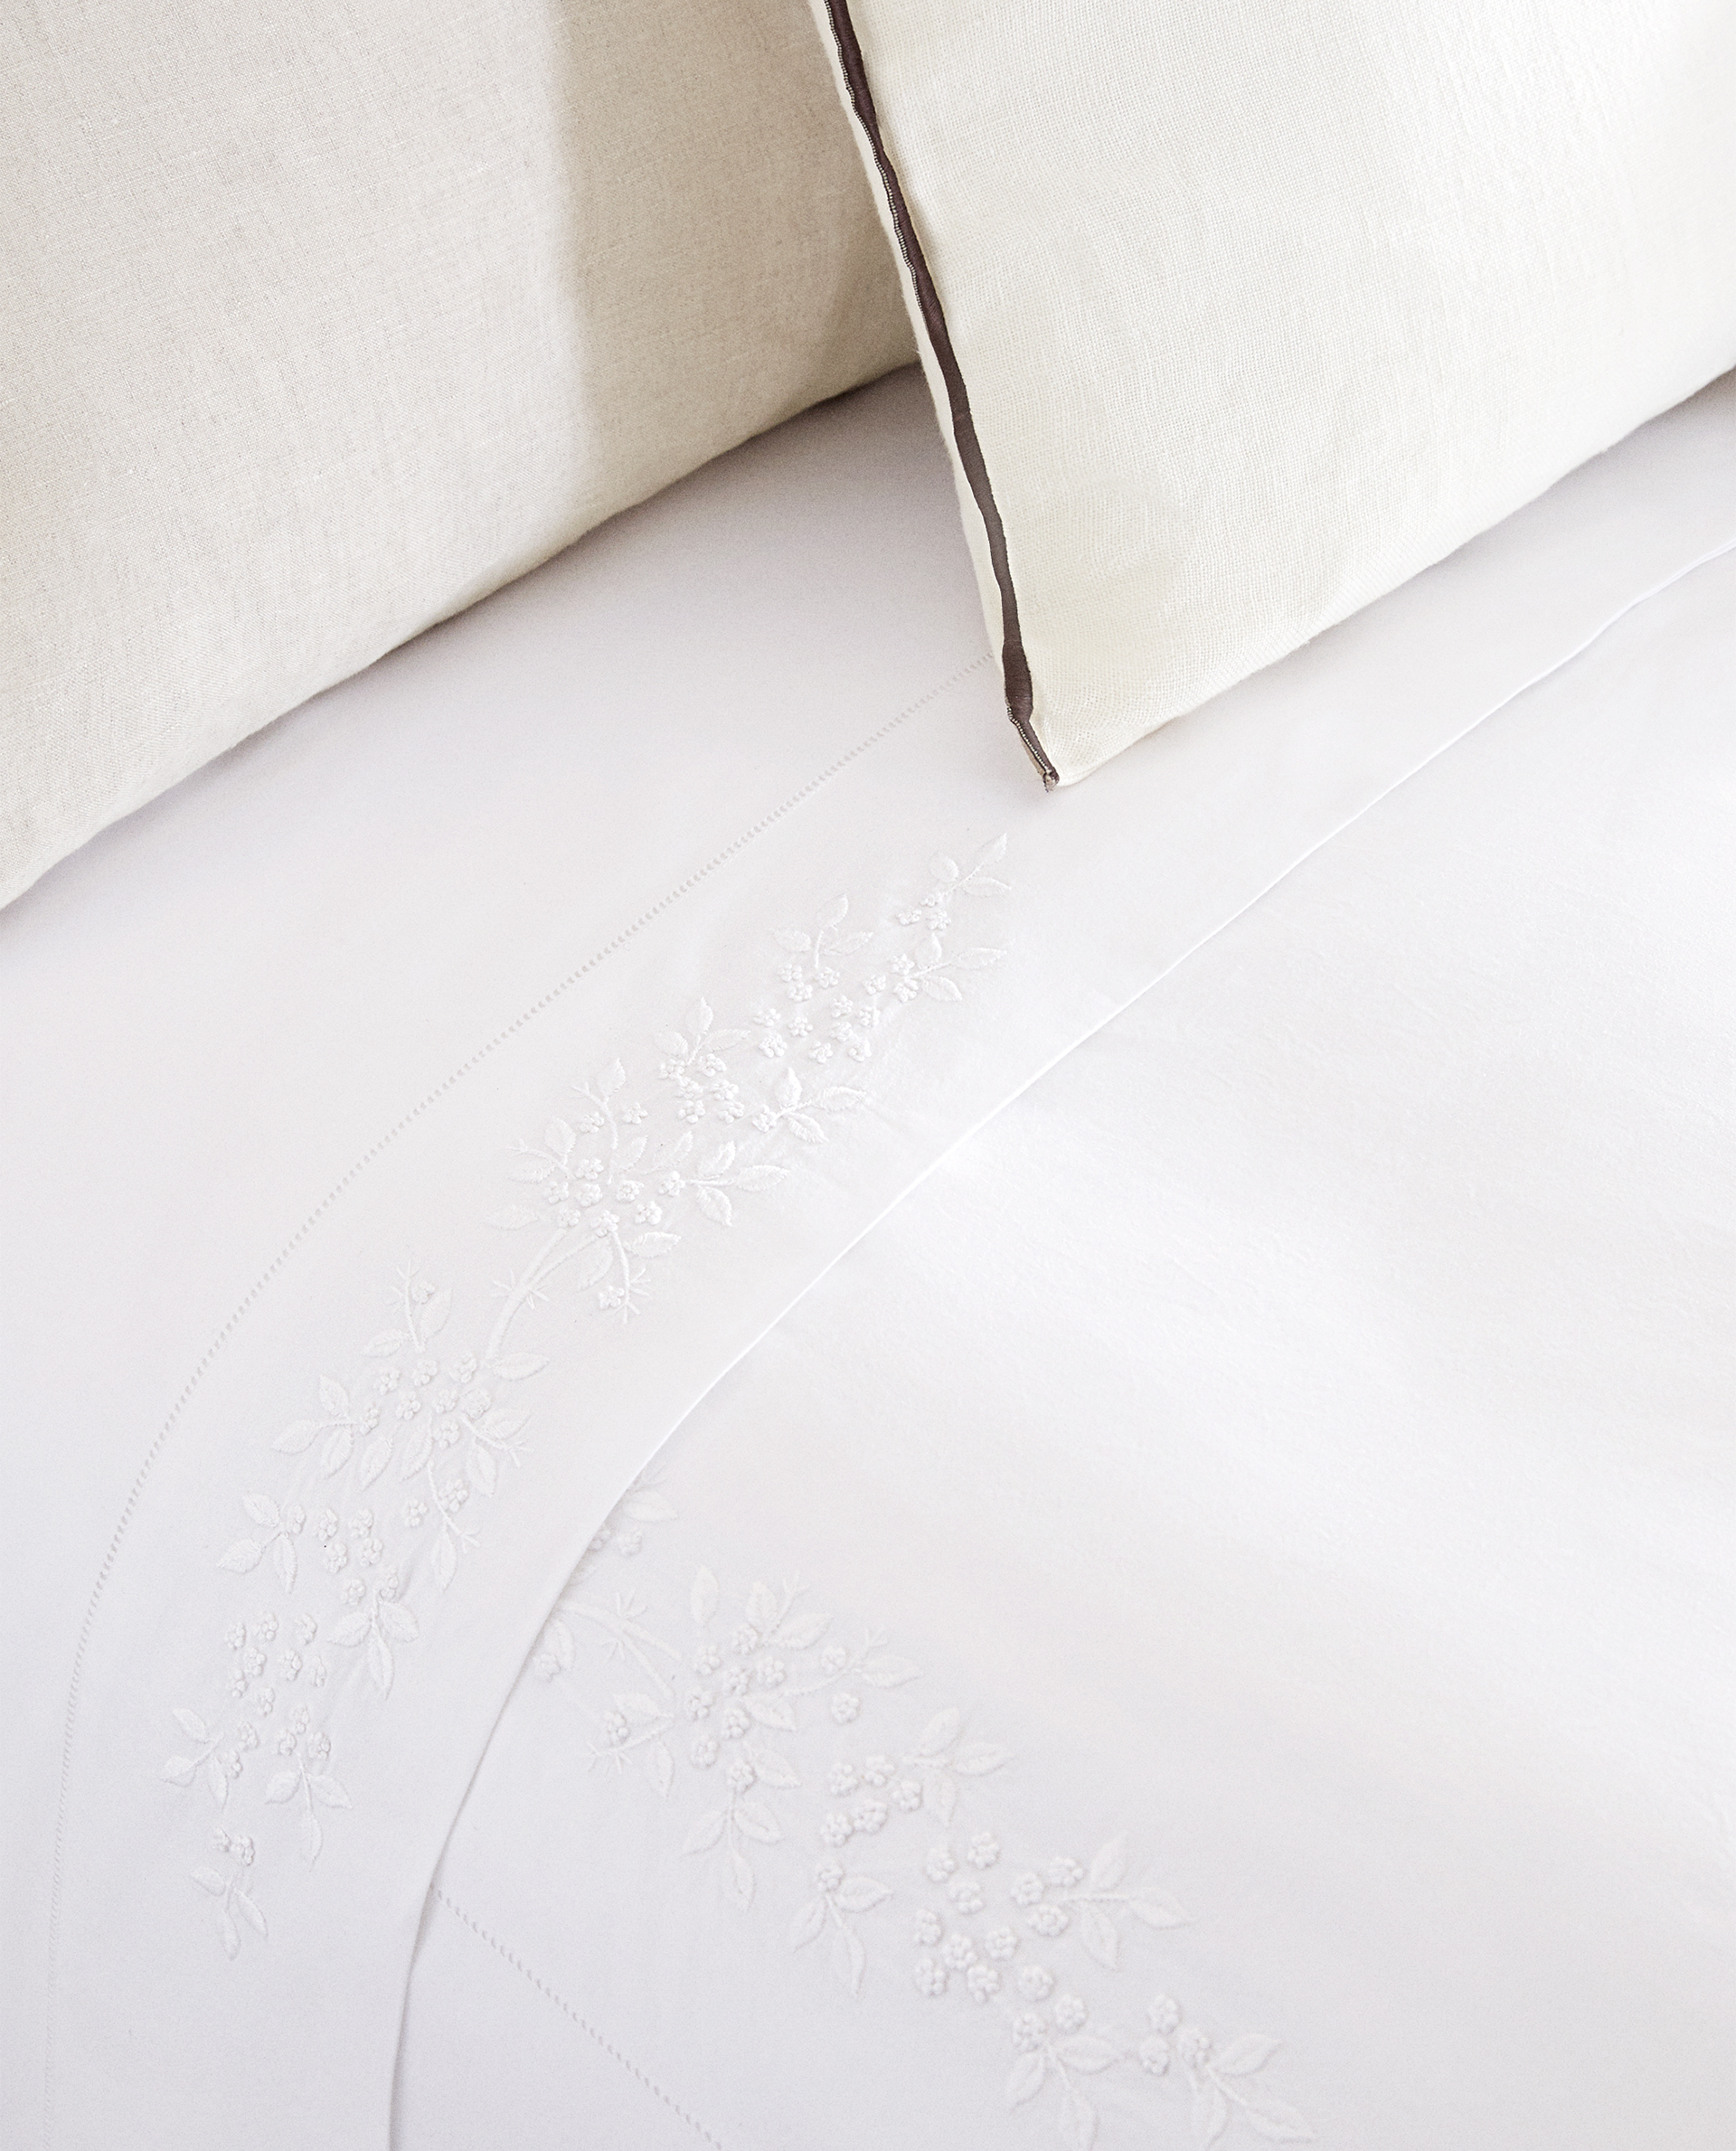 Mimosa Embroidery Duvet Cover, Porthault Duvet Covers